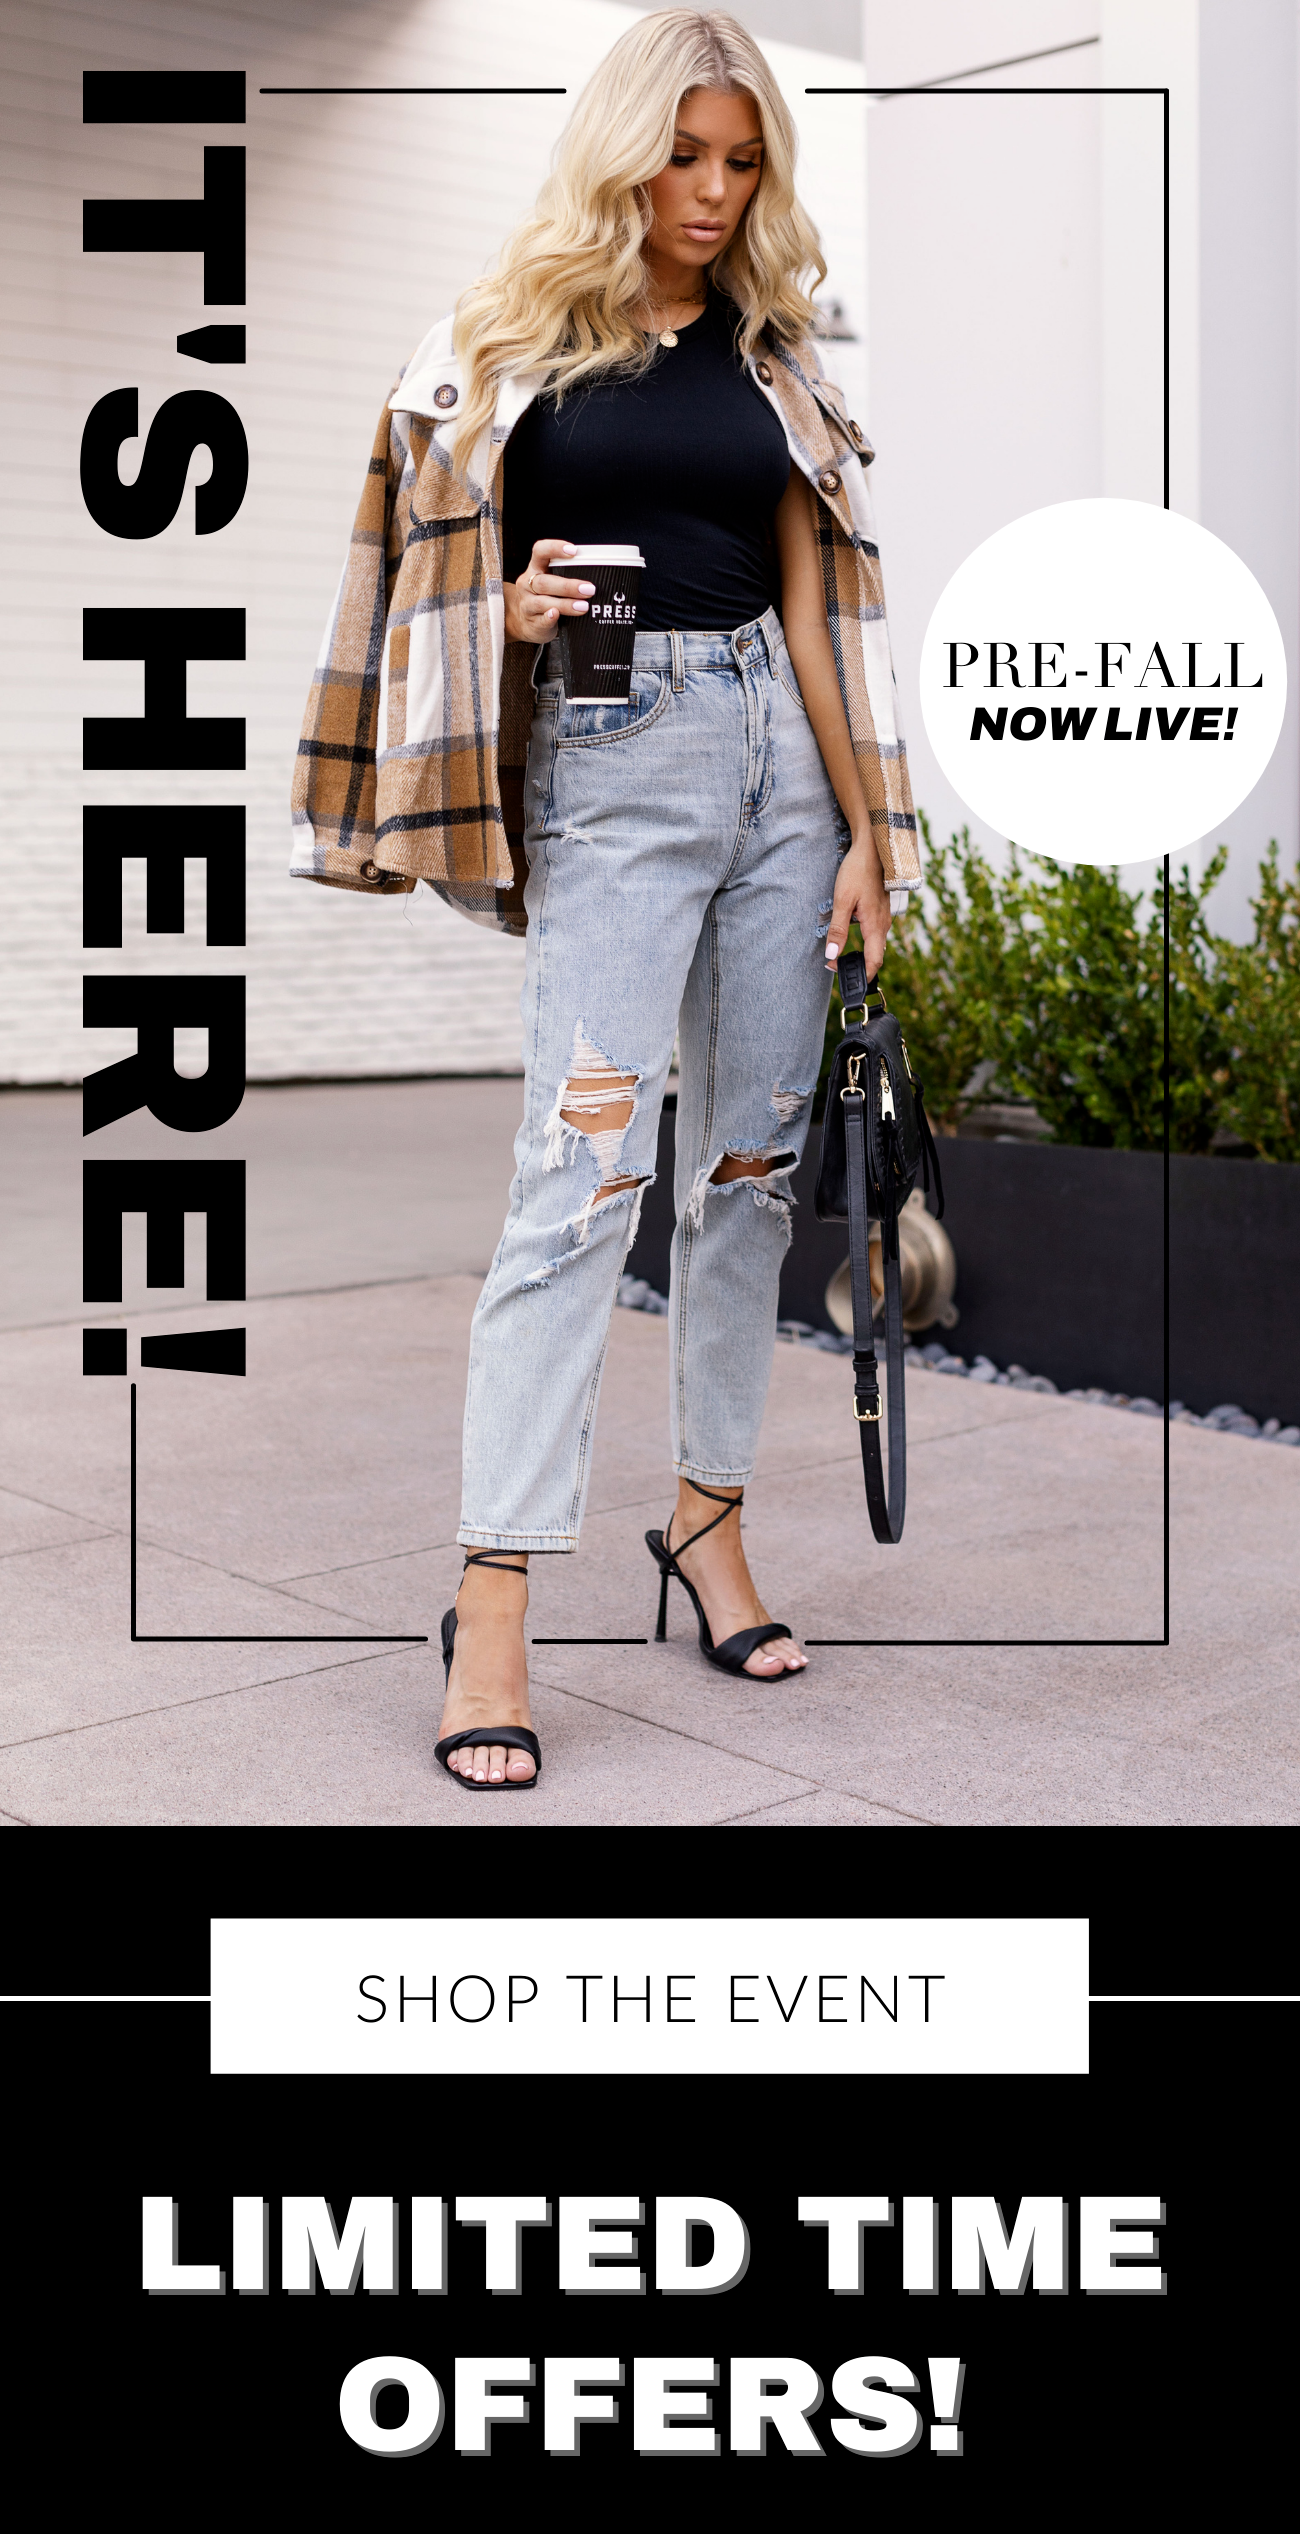 Shop the Pre-Fall Event NOW